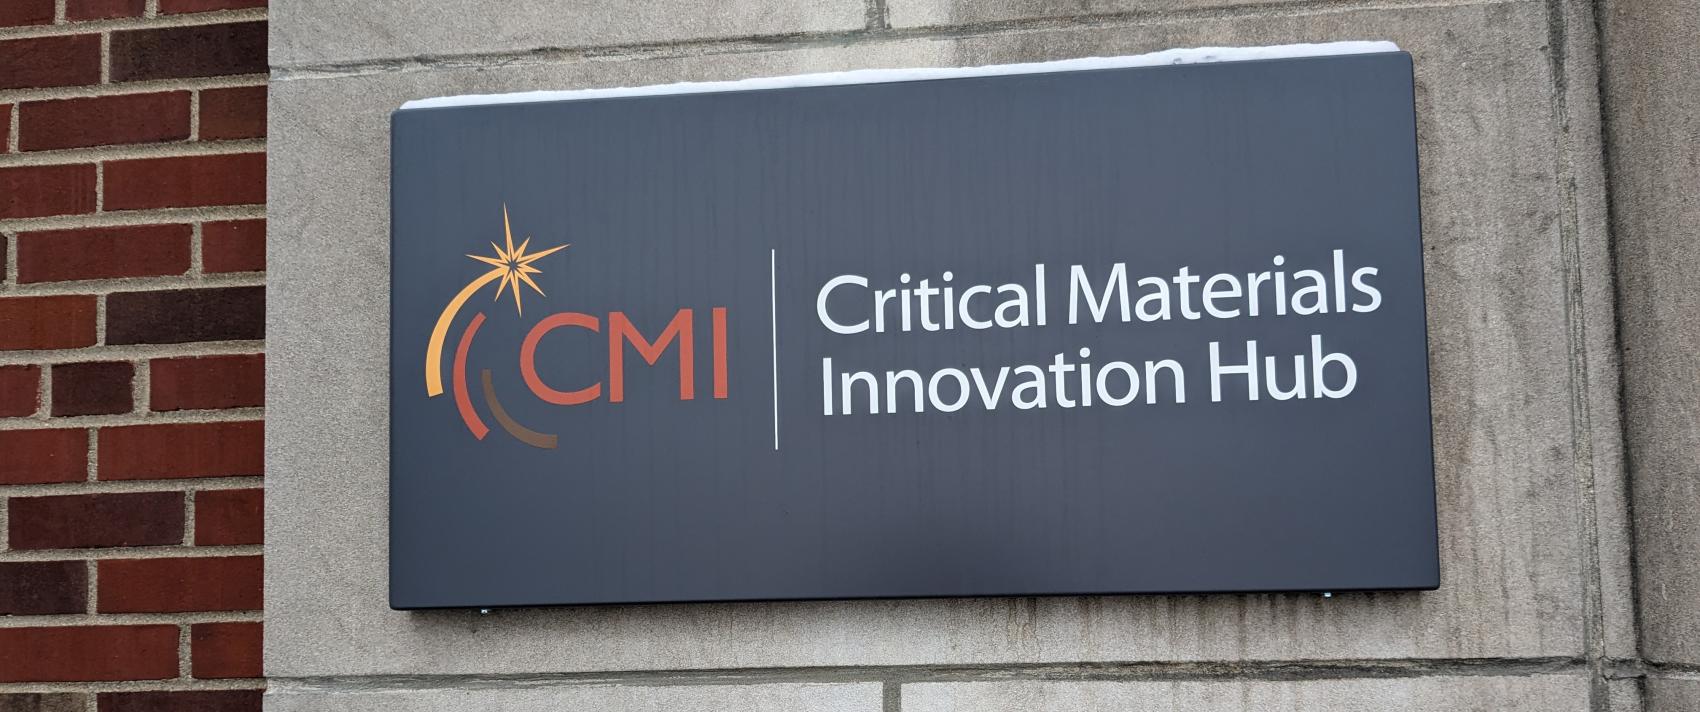 photo of sign with logo for CMI and words Critical Material Innovation Hub